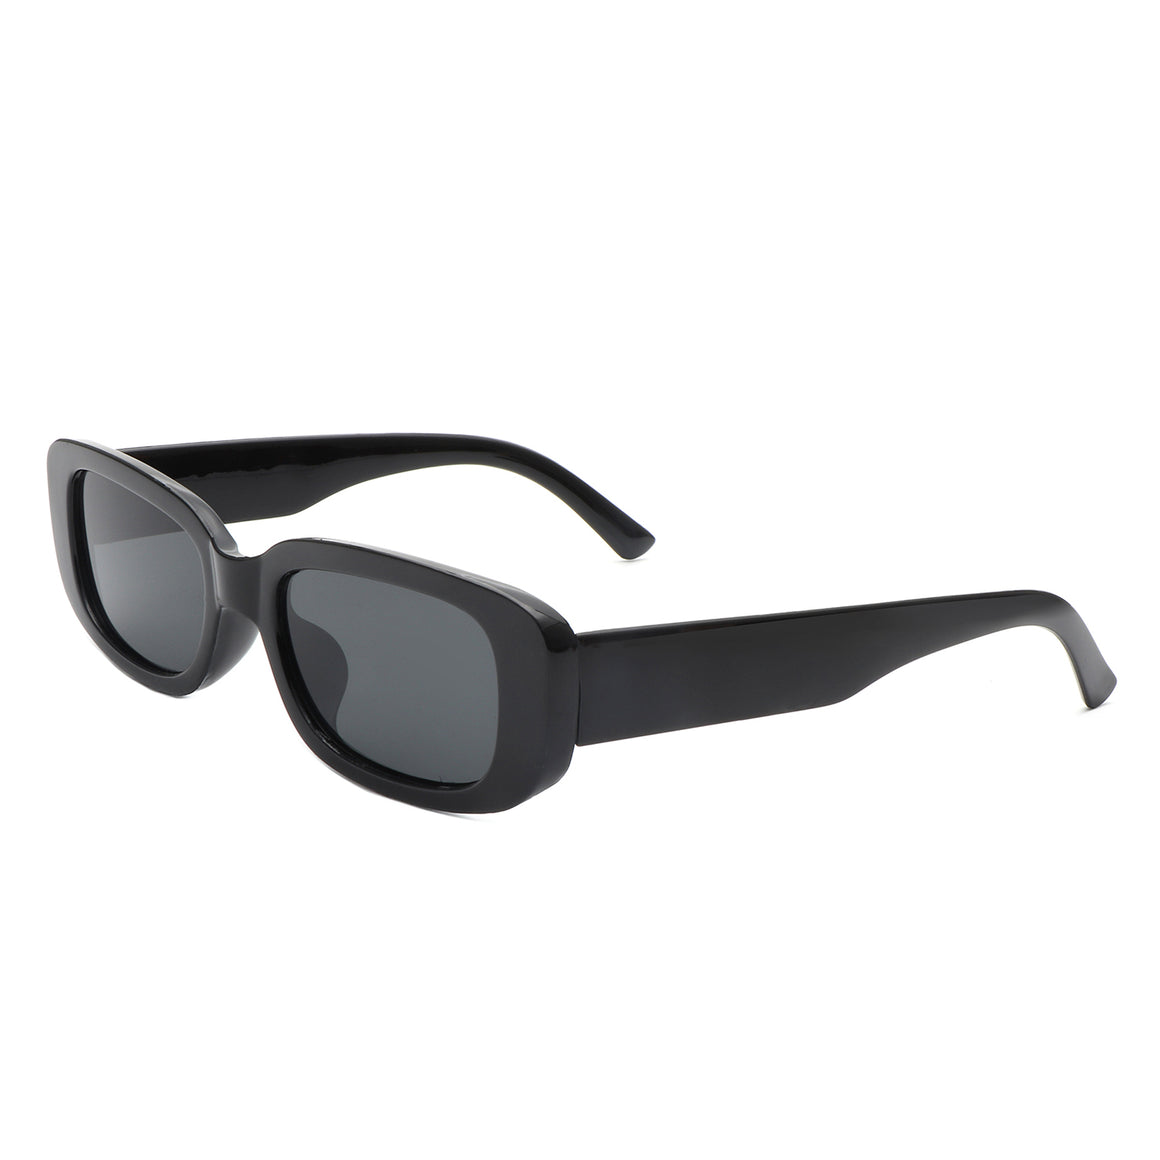 Buy mincl/punk Small Chic Fashion Vintage Round Sunglasses Metal Frame ( black) at Amazon.in